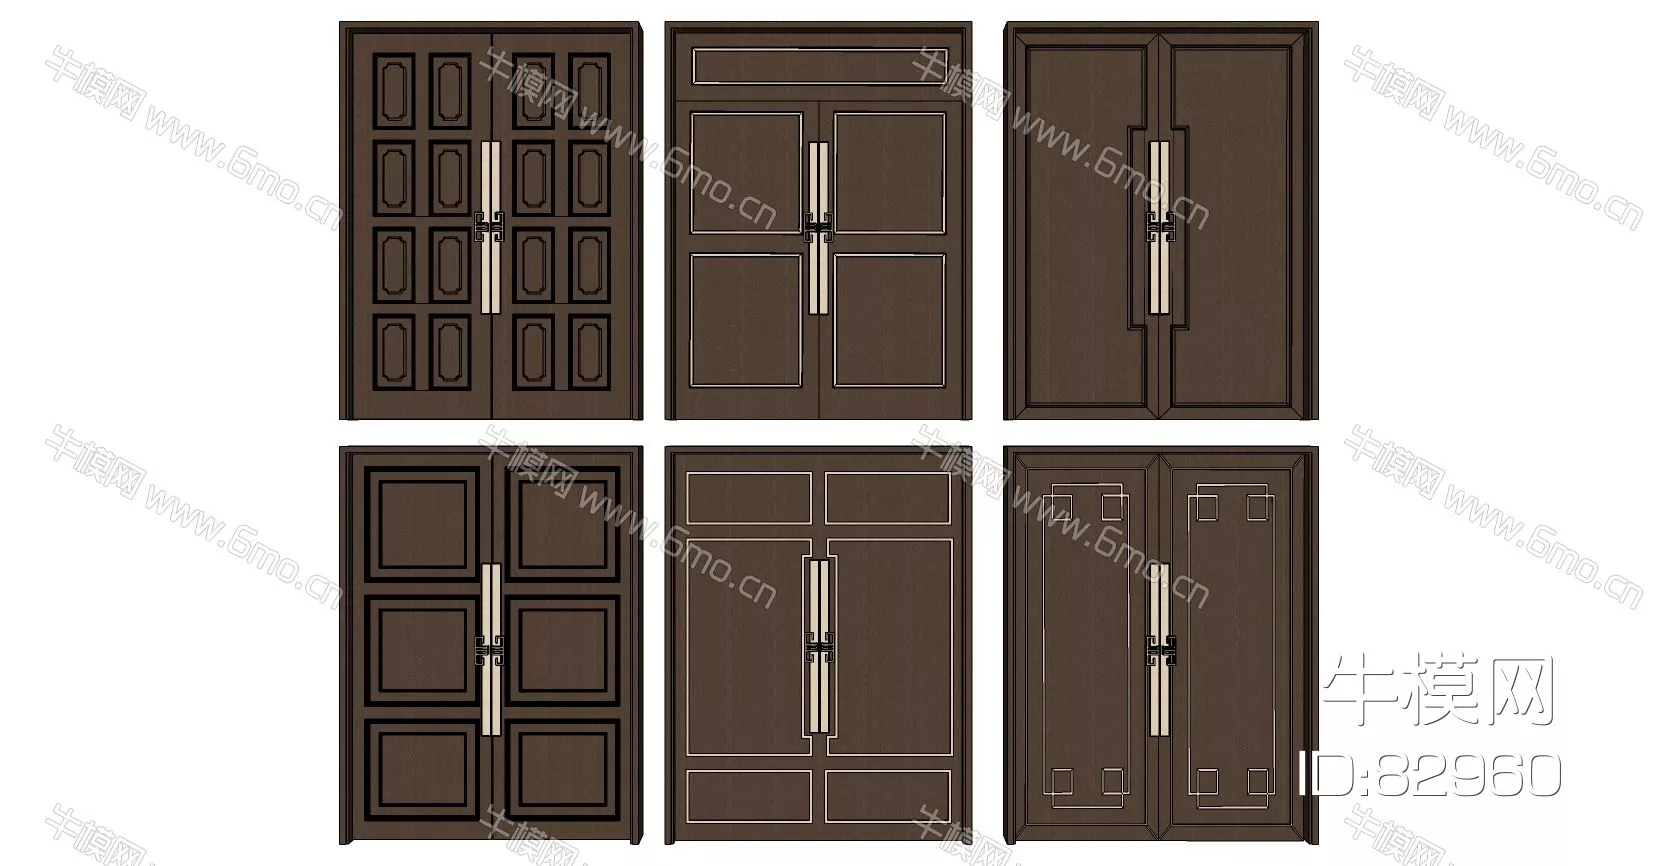 CHINESE DOOR AND WINDOWS - SKETCHUP 3D MODEL - ENSCAPE - 82960